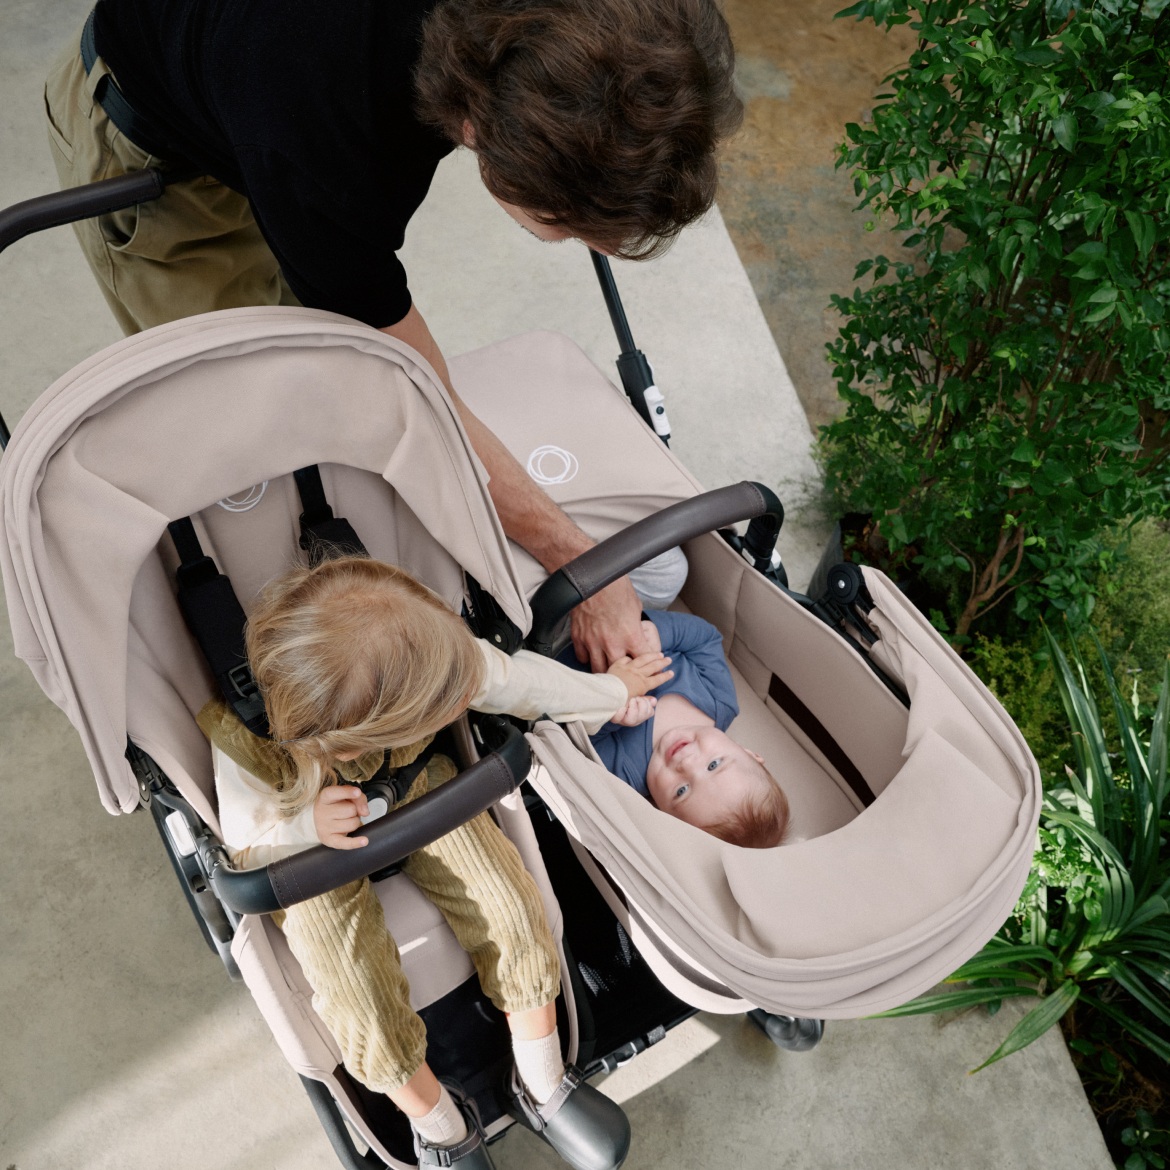 A mom strolls with two children in a Bugaboo Donkey 5 double stroller. The girl in the seat is reaching out to her sibling in the bassinet.